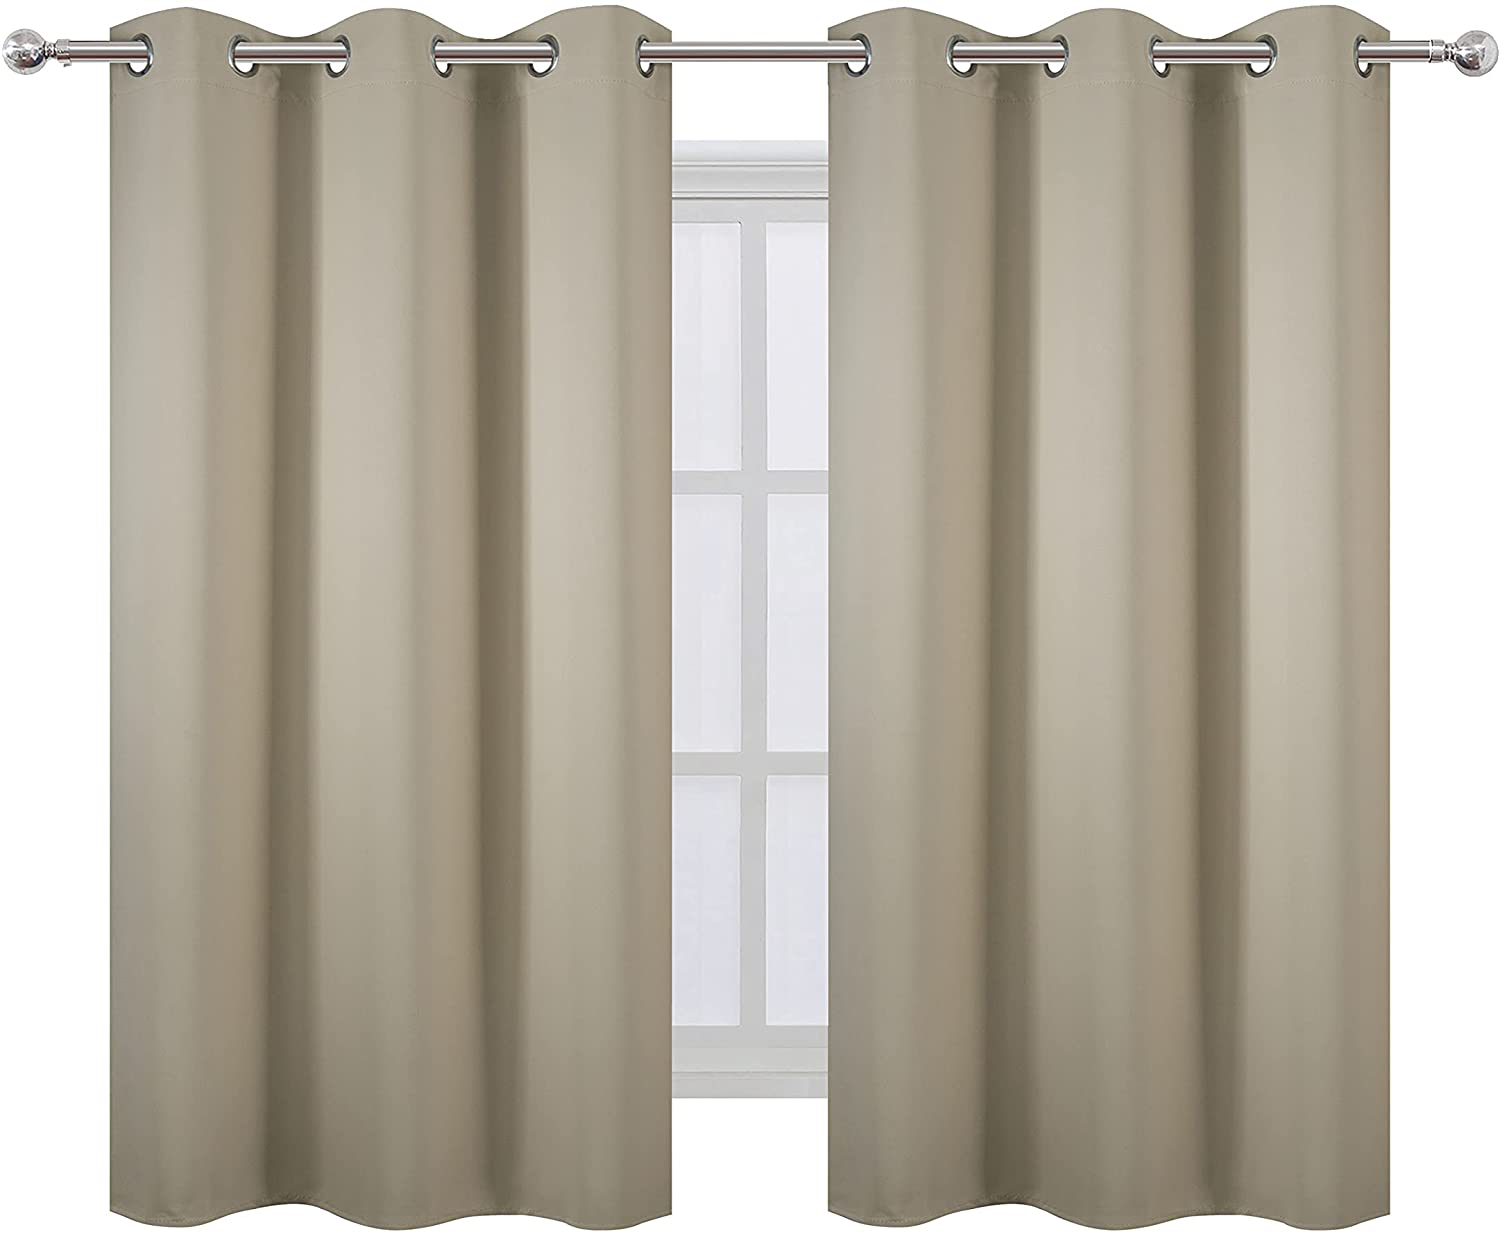 LEMOMO Black Blackout Curtains 52 x 63 Inch Length/Set of 2 Curtain Panels/Thermal Insulated Room Darkening Curtains for Bedroom and Living Room